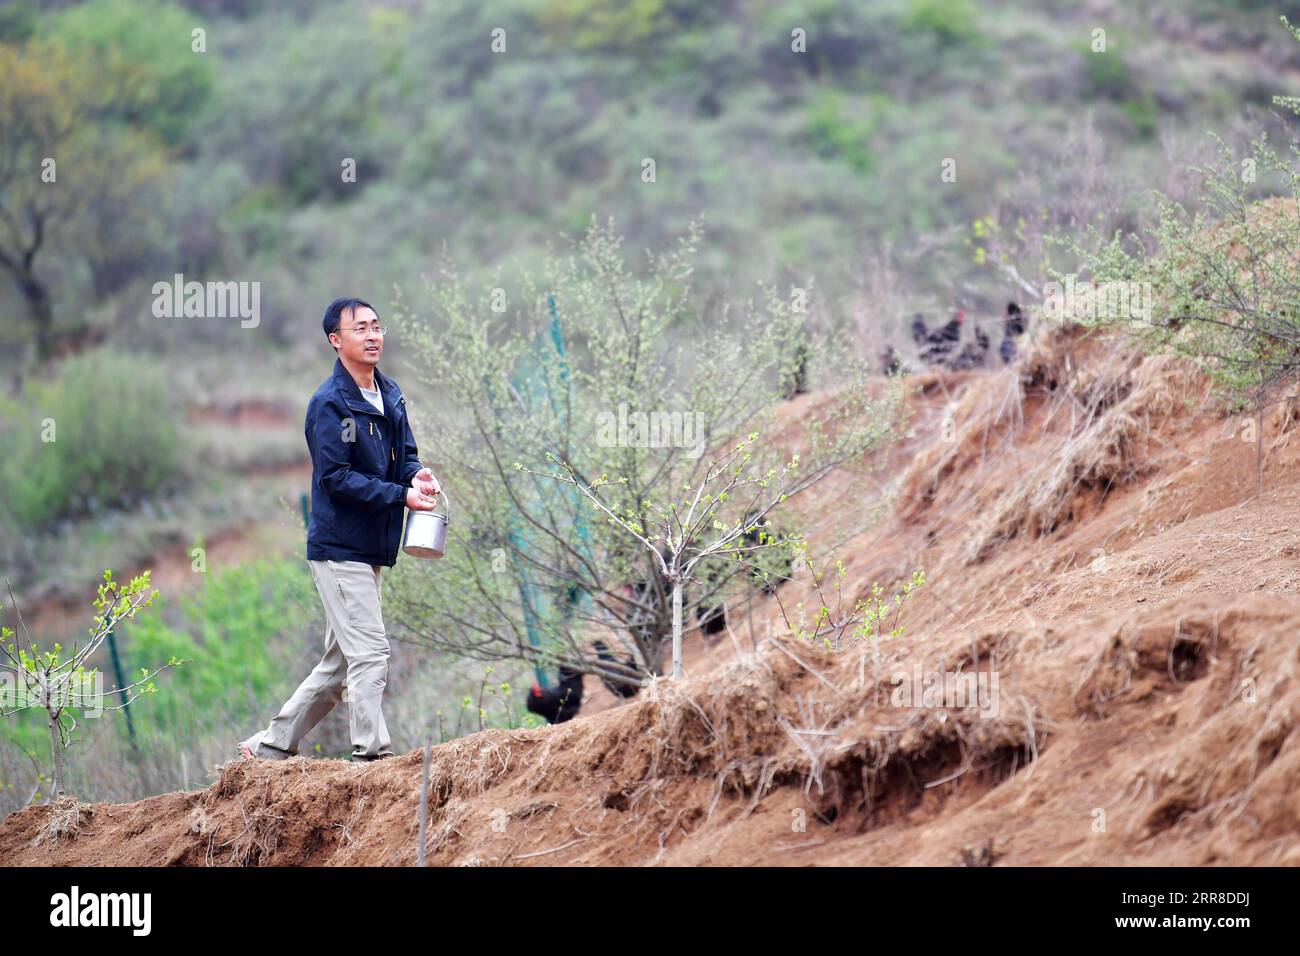 210503 -- TIANSHUI, May 3, 2021 -- Zhang Shuhao feeds fowls on the hill of Mudan Township, Tianshui City of northwest China s Gansu Province, on April 27, 2021. Zhang Shuhao, 42, quit his well-paid job three years ago to start an agriculture company with a few partners sharing the same vision at a mountainous village in Mudan Township, Tianshui City. In three years, Xinghuarong, Zhang s company, contracted 6,200 mu about 413 hectares of idle arable lands, where terraced fields, greenhouses, and a reservoir have been built to grow diverse produces ranging from traditional Chinese medicine mater Stock Photo